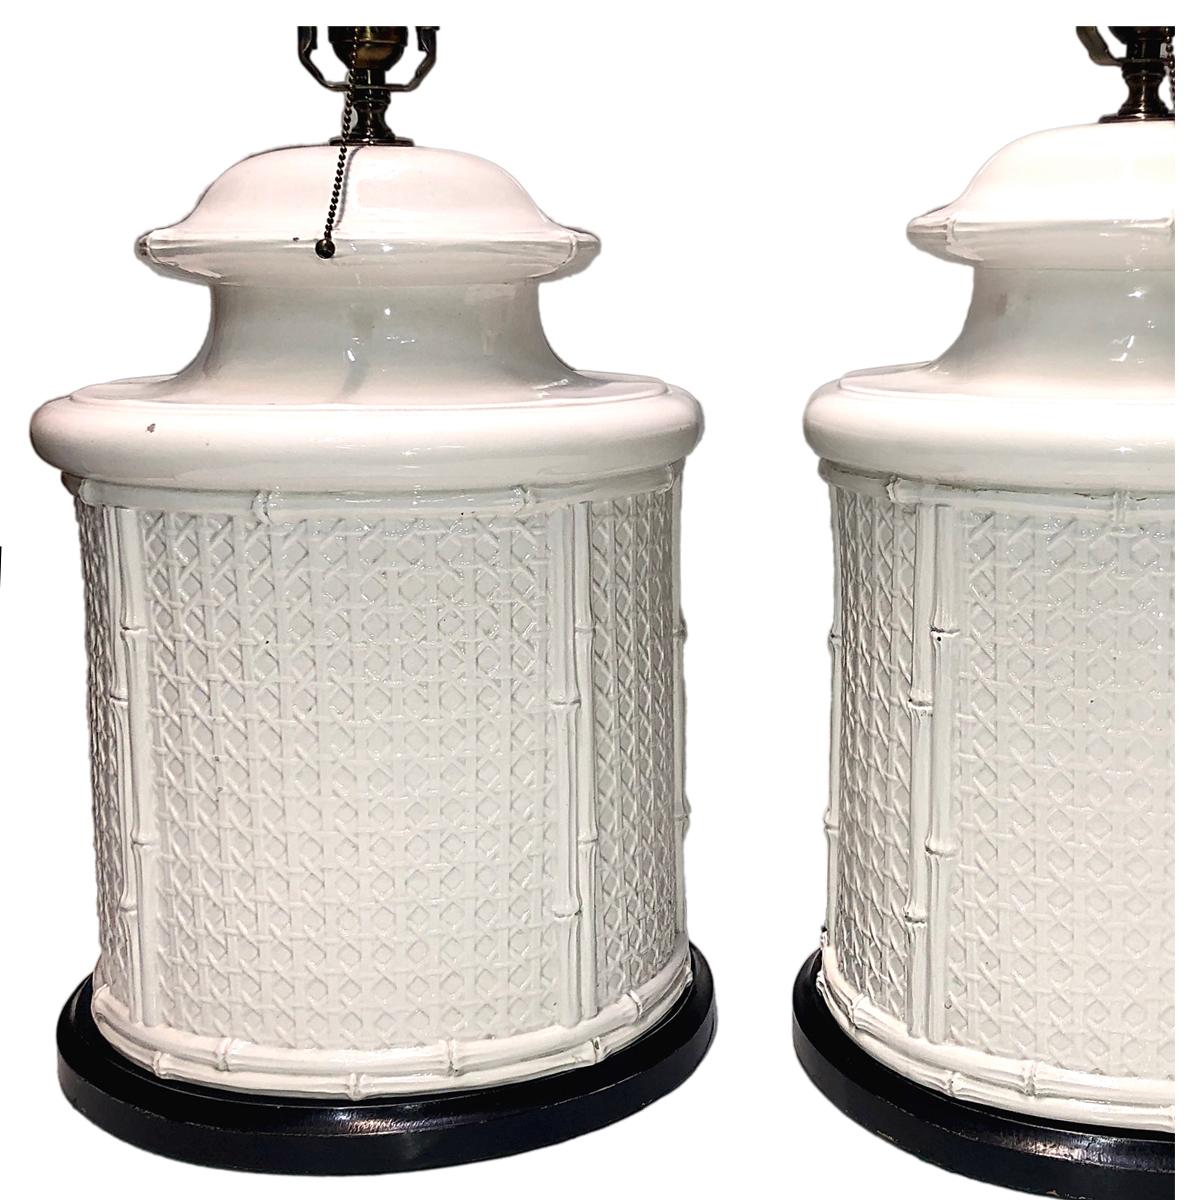 Pair of circa 1950s large French porcelain lamps in the shape of wicker and bamboo with ebonized bases.

Measurements:
Height of body 19